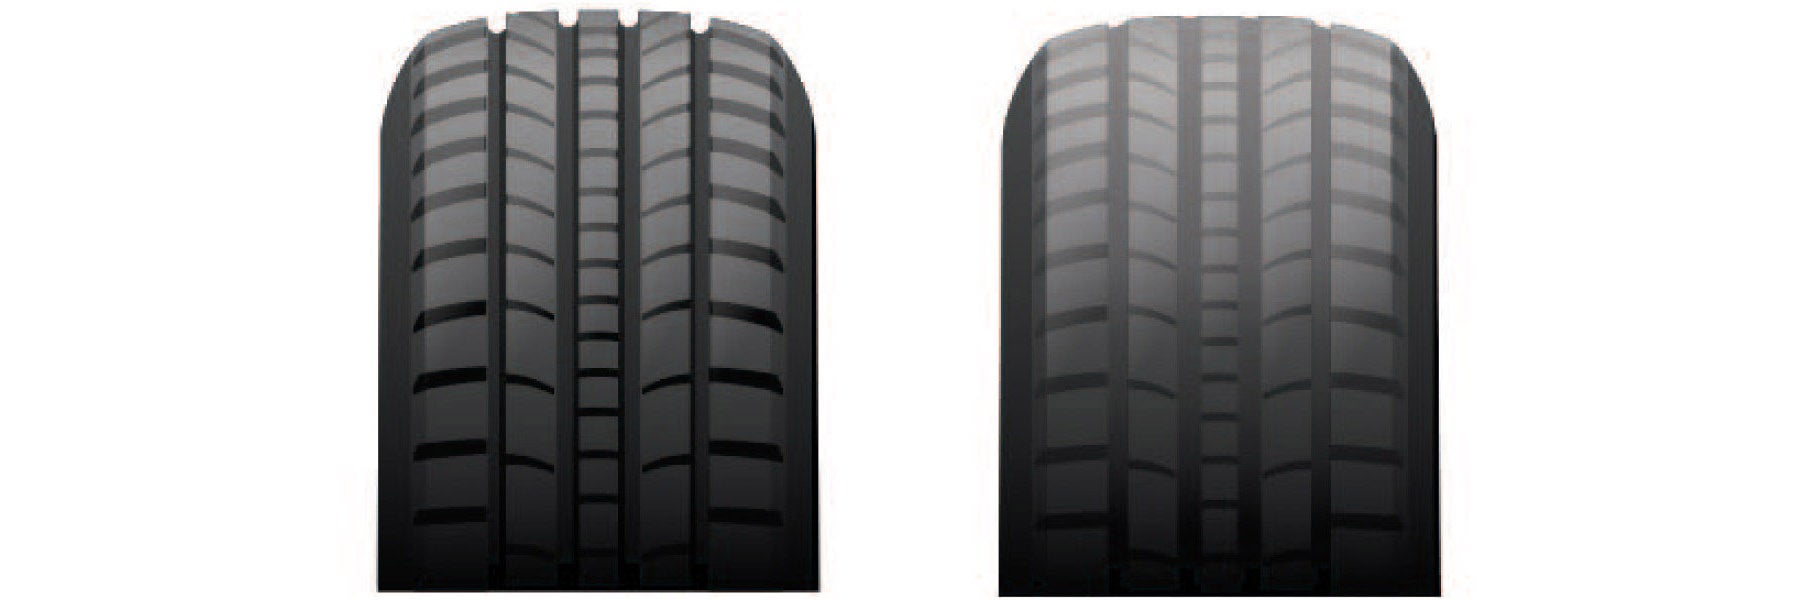 Tire tread depth comparison at Kia of West Chester in West Chester PA